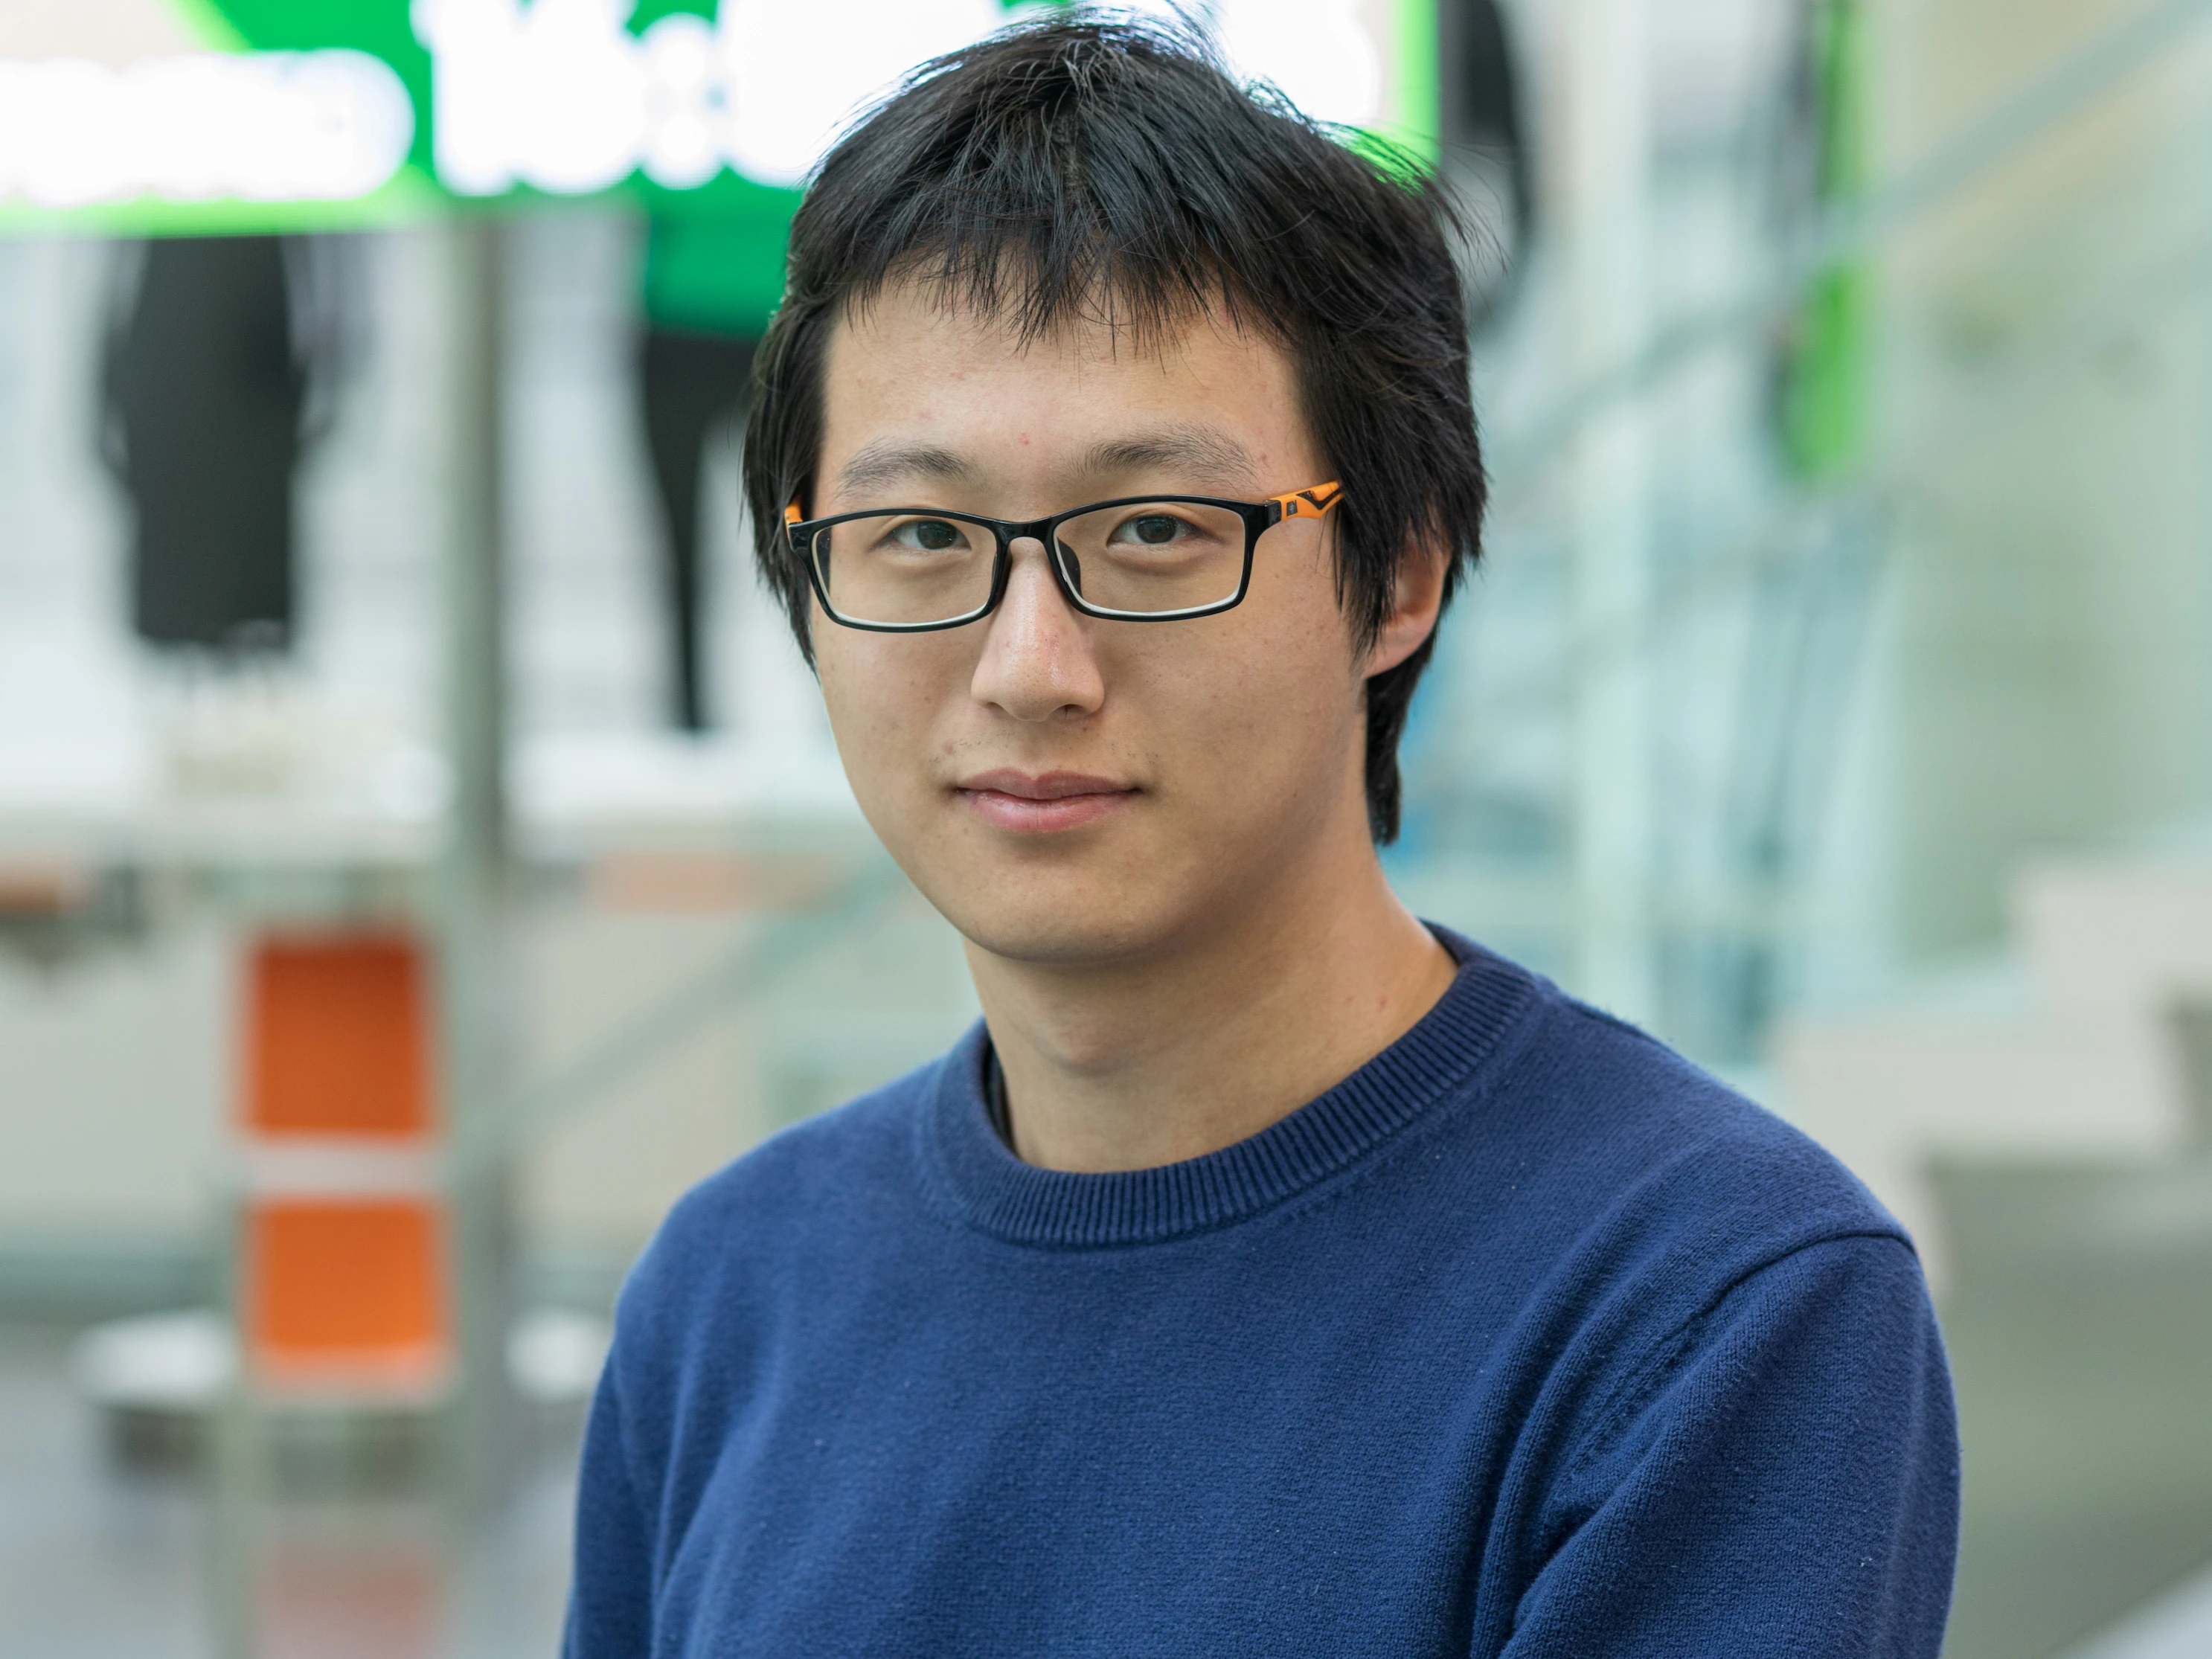 Hao Tan is a Data Science Ph.D. Fellow at Bloomberg (Photographer: Lori Hoffman/Bloomberg)